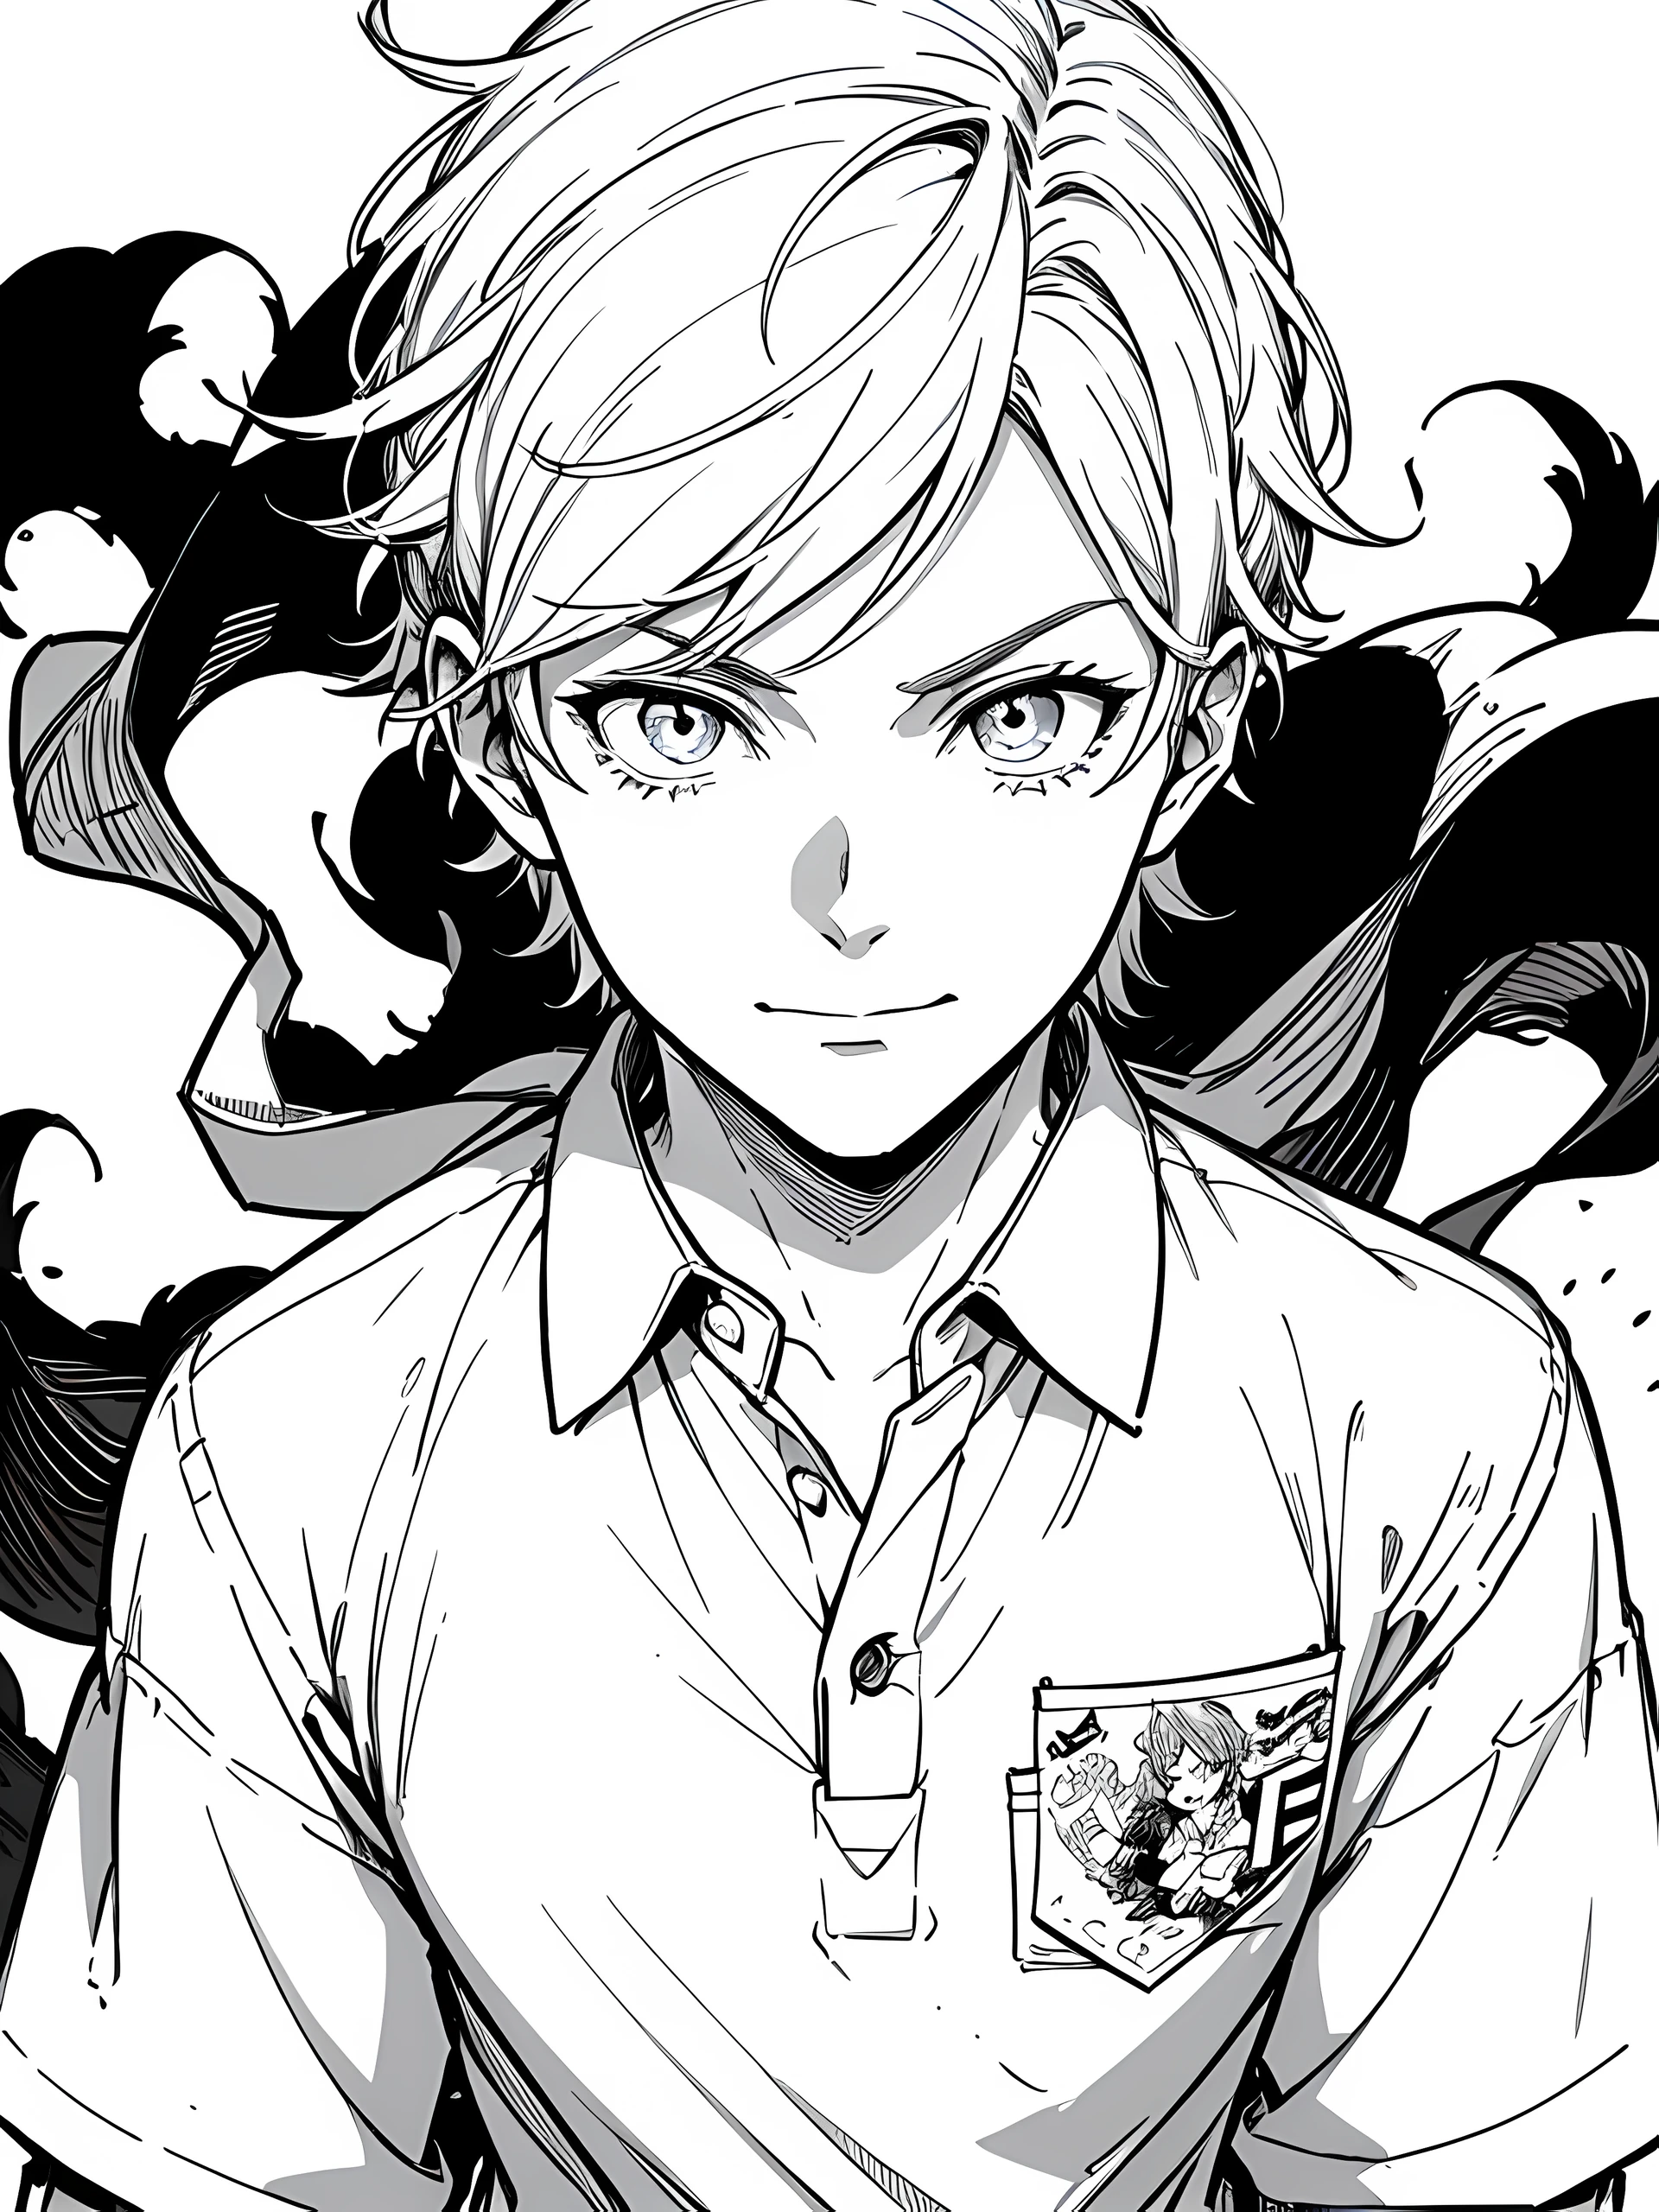 man, male, age 18, solo, face captured, close up, looking at the camera, body towards camera, facing camera, serious eyes, calming face, slightly smile mouth, speaking mouth, wearing polo, wearing ID sling, wearing lanyard, ID holder, lineart, manga, manga art, comic, black and white art, monochrome, room background, clear background, white background